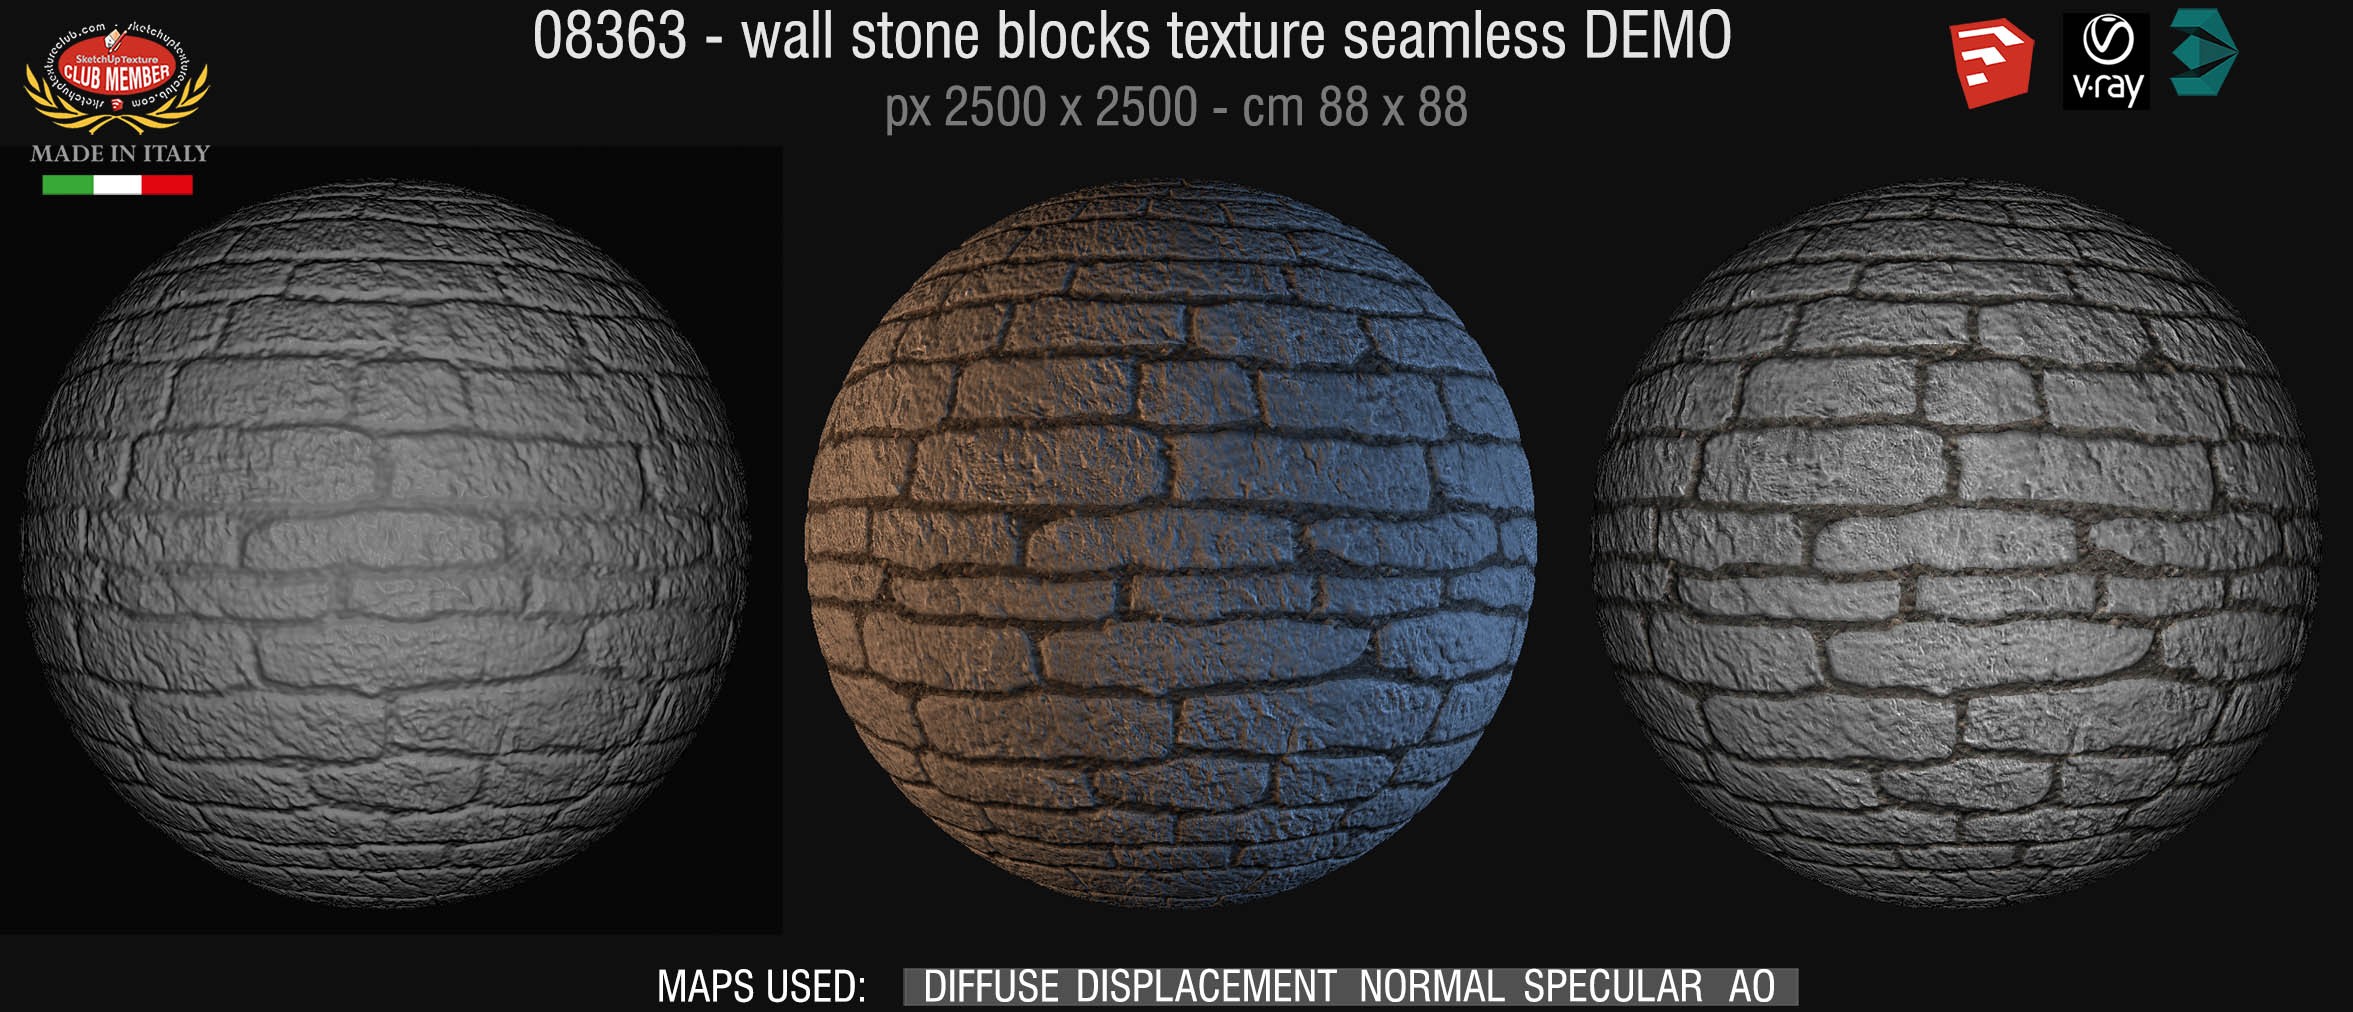 08363 HR Wall stone with regular blocks texture + maps DEMO